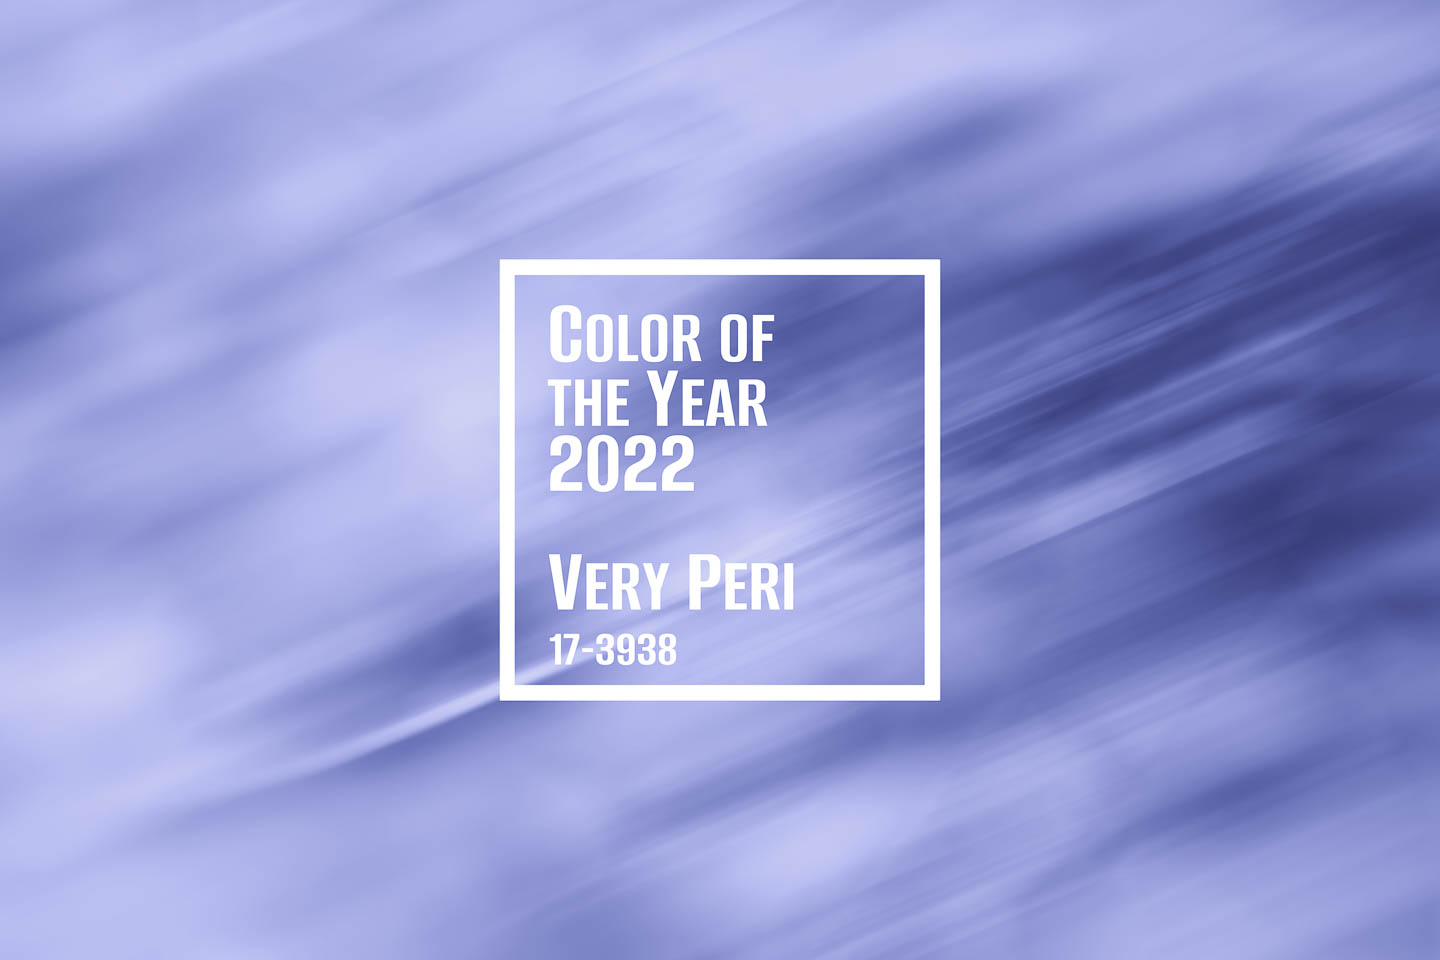 Pantone's color of the year 2022 'Very Peri'